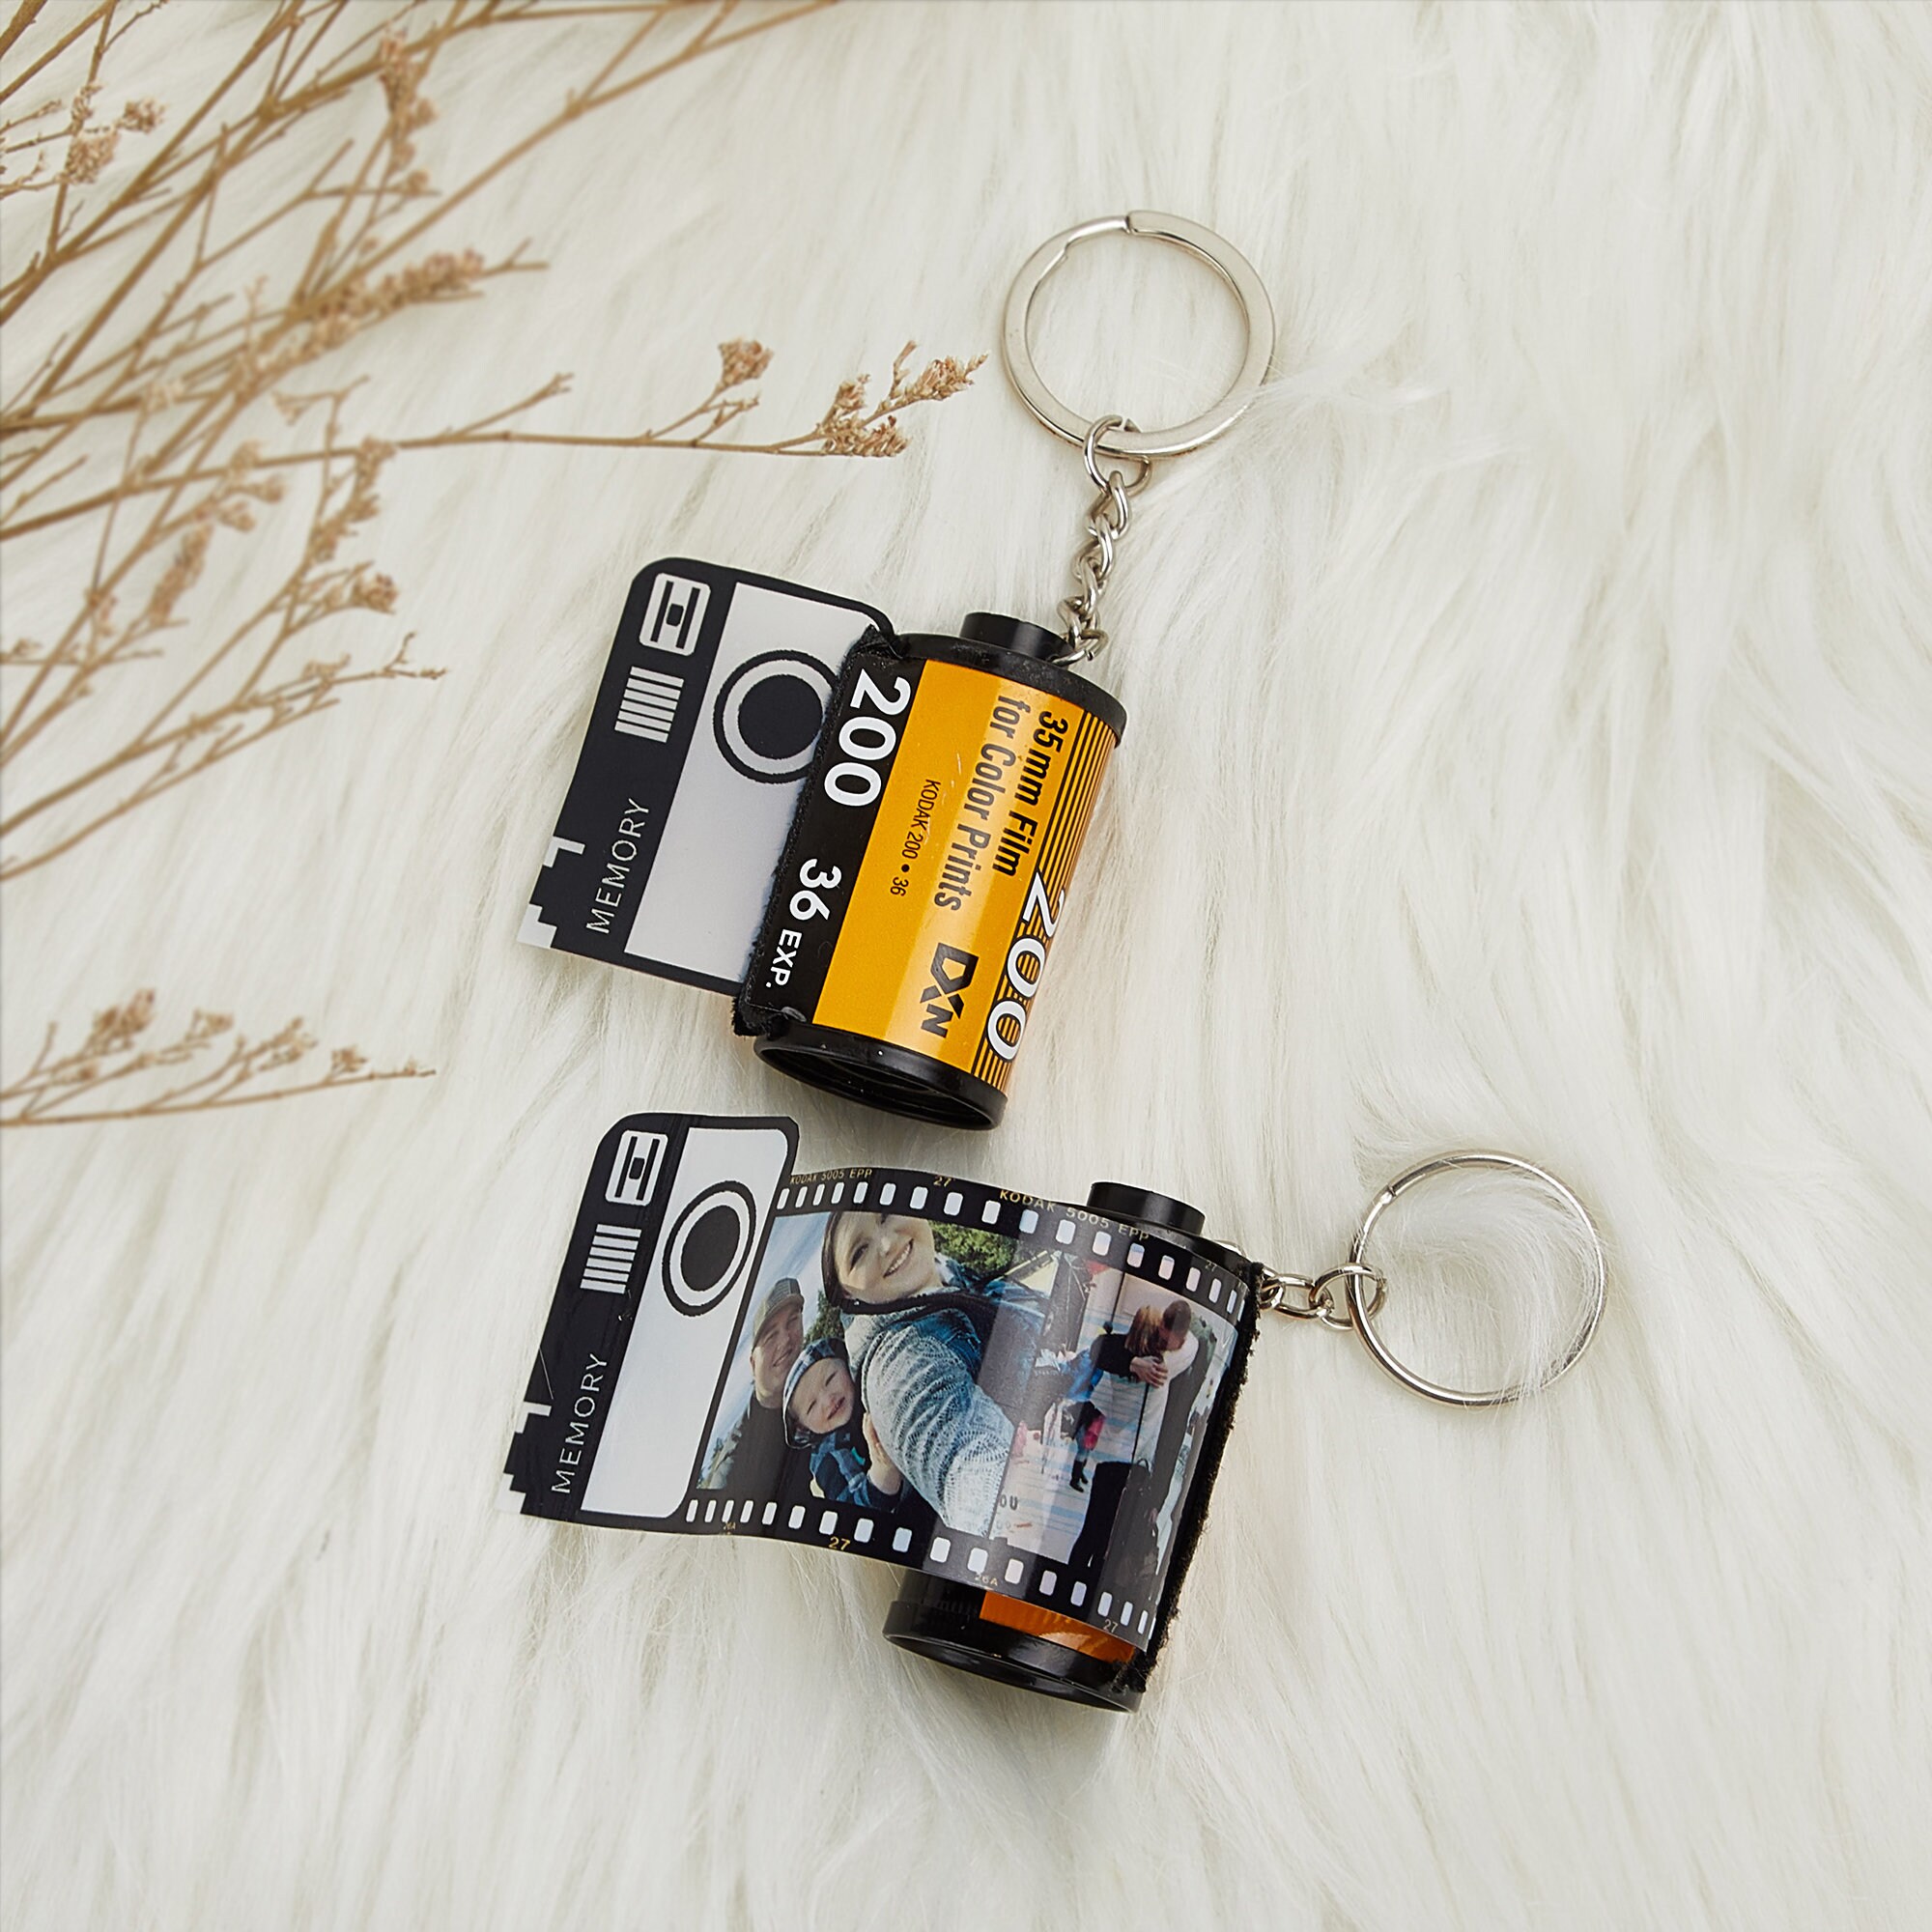 Personalized Memory Film Roll Keychain, Camera Film Roll Keyring, Photo  Gift sold by World-View Beautiful, SKU 128230886